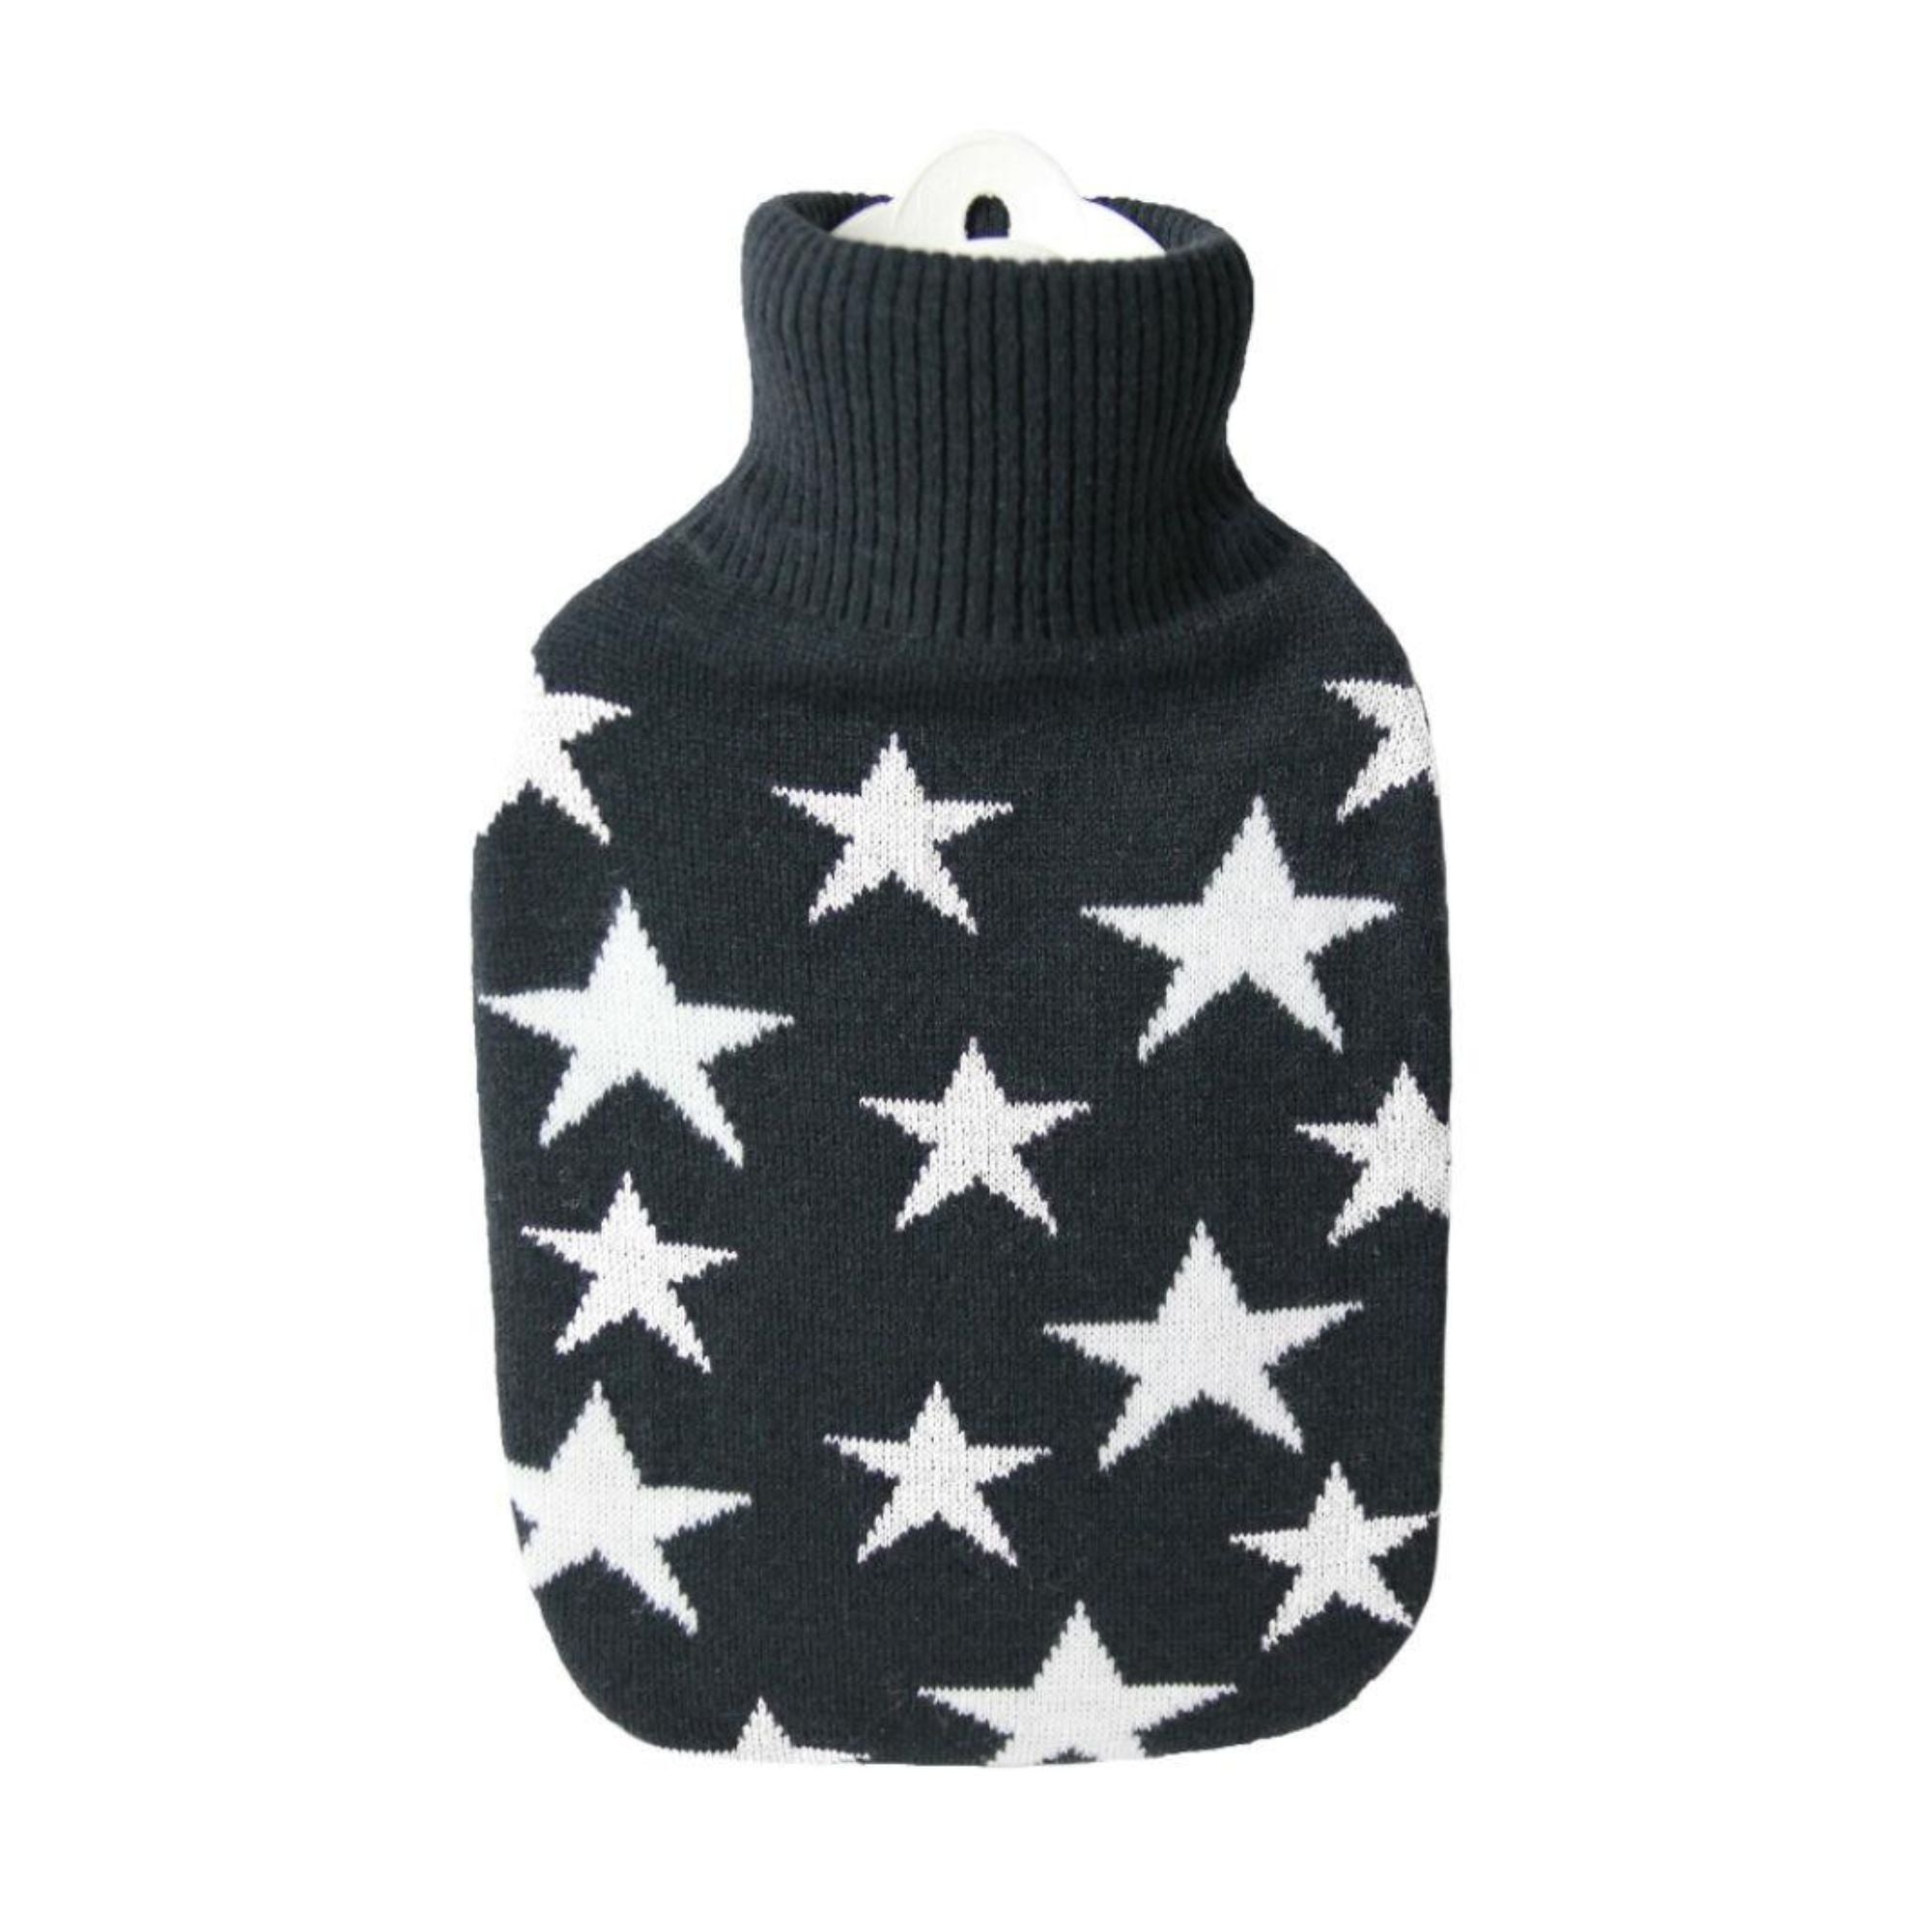 1.8 Litre Hot Water Bottle with Knitted Black with White Star Cover (rubberless)